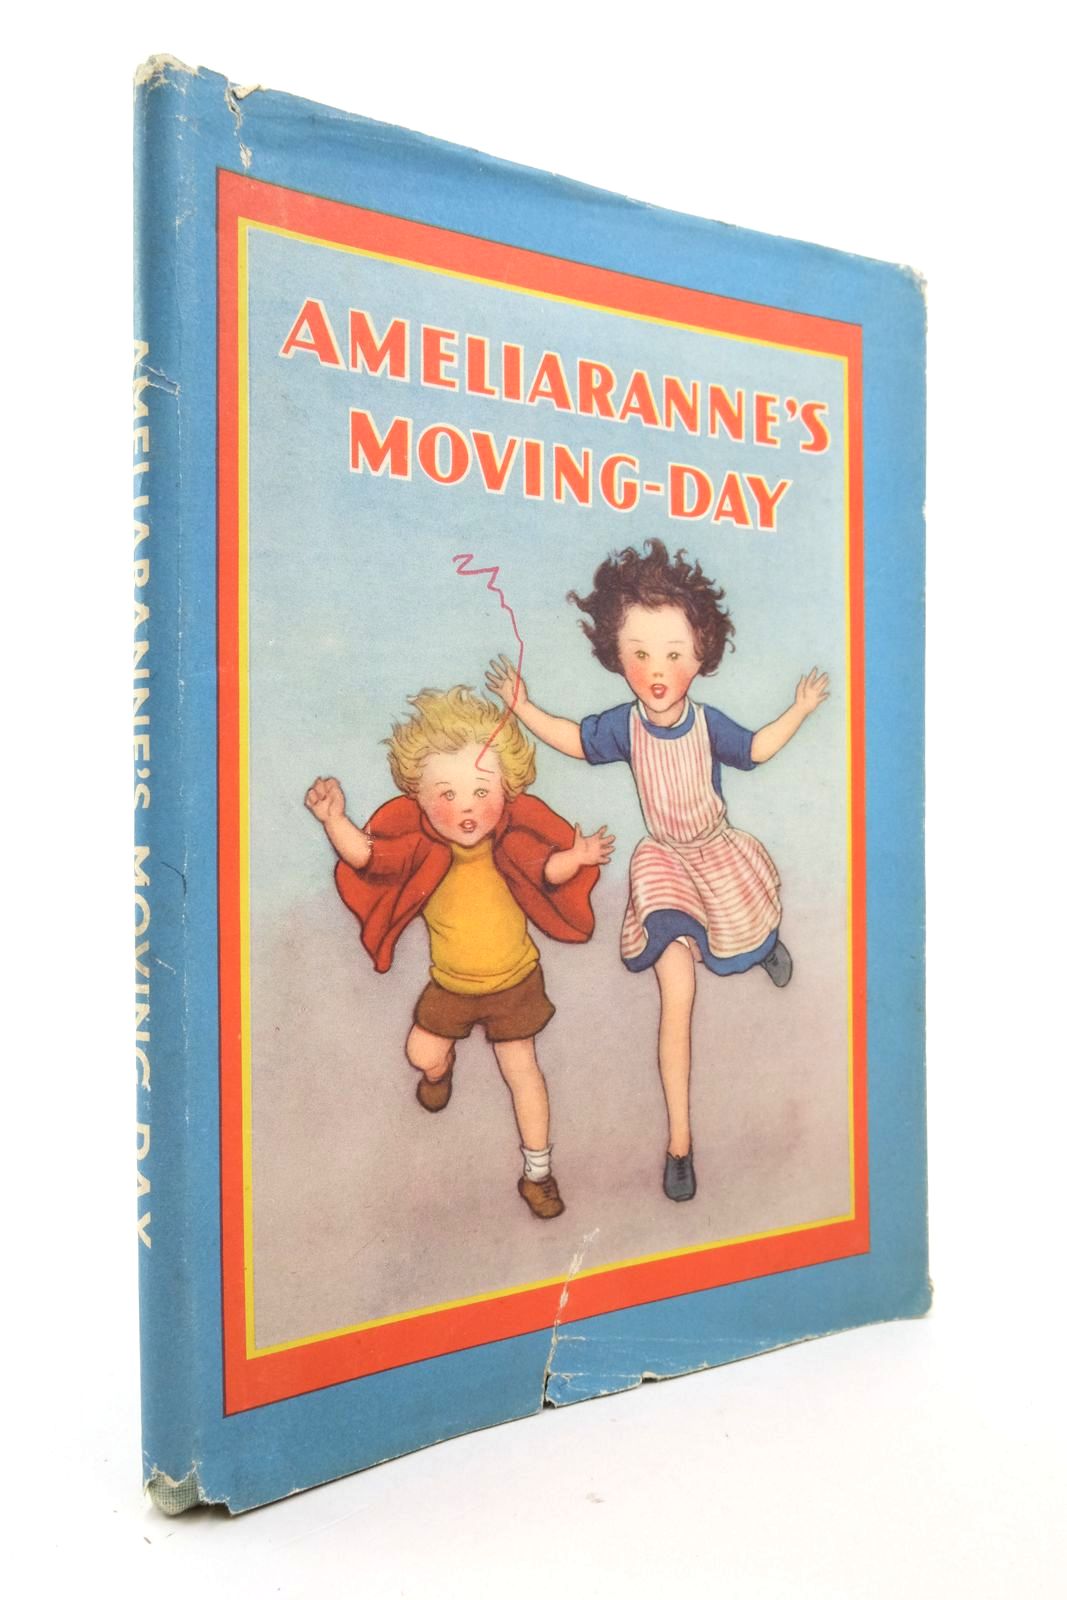 Photo of AMELIARANNE'S MOVING-DAY written by Morris, Ethelberta illustrated by Pearse, S.B. published by George G. Harrap &amp; Co. Ltd. (STOCK CODE: 2137180)  for sale by Stella & Rose's Books